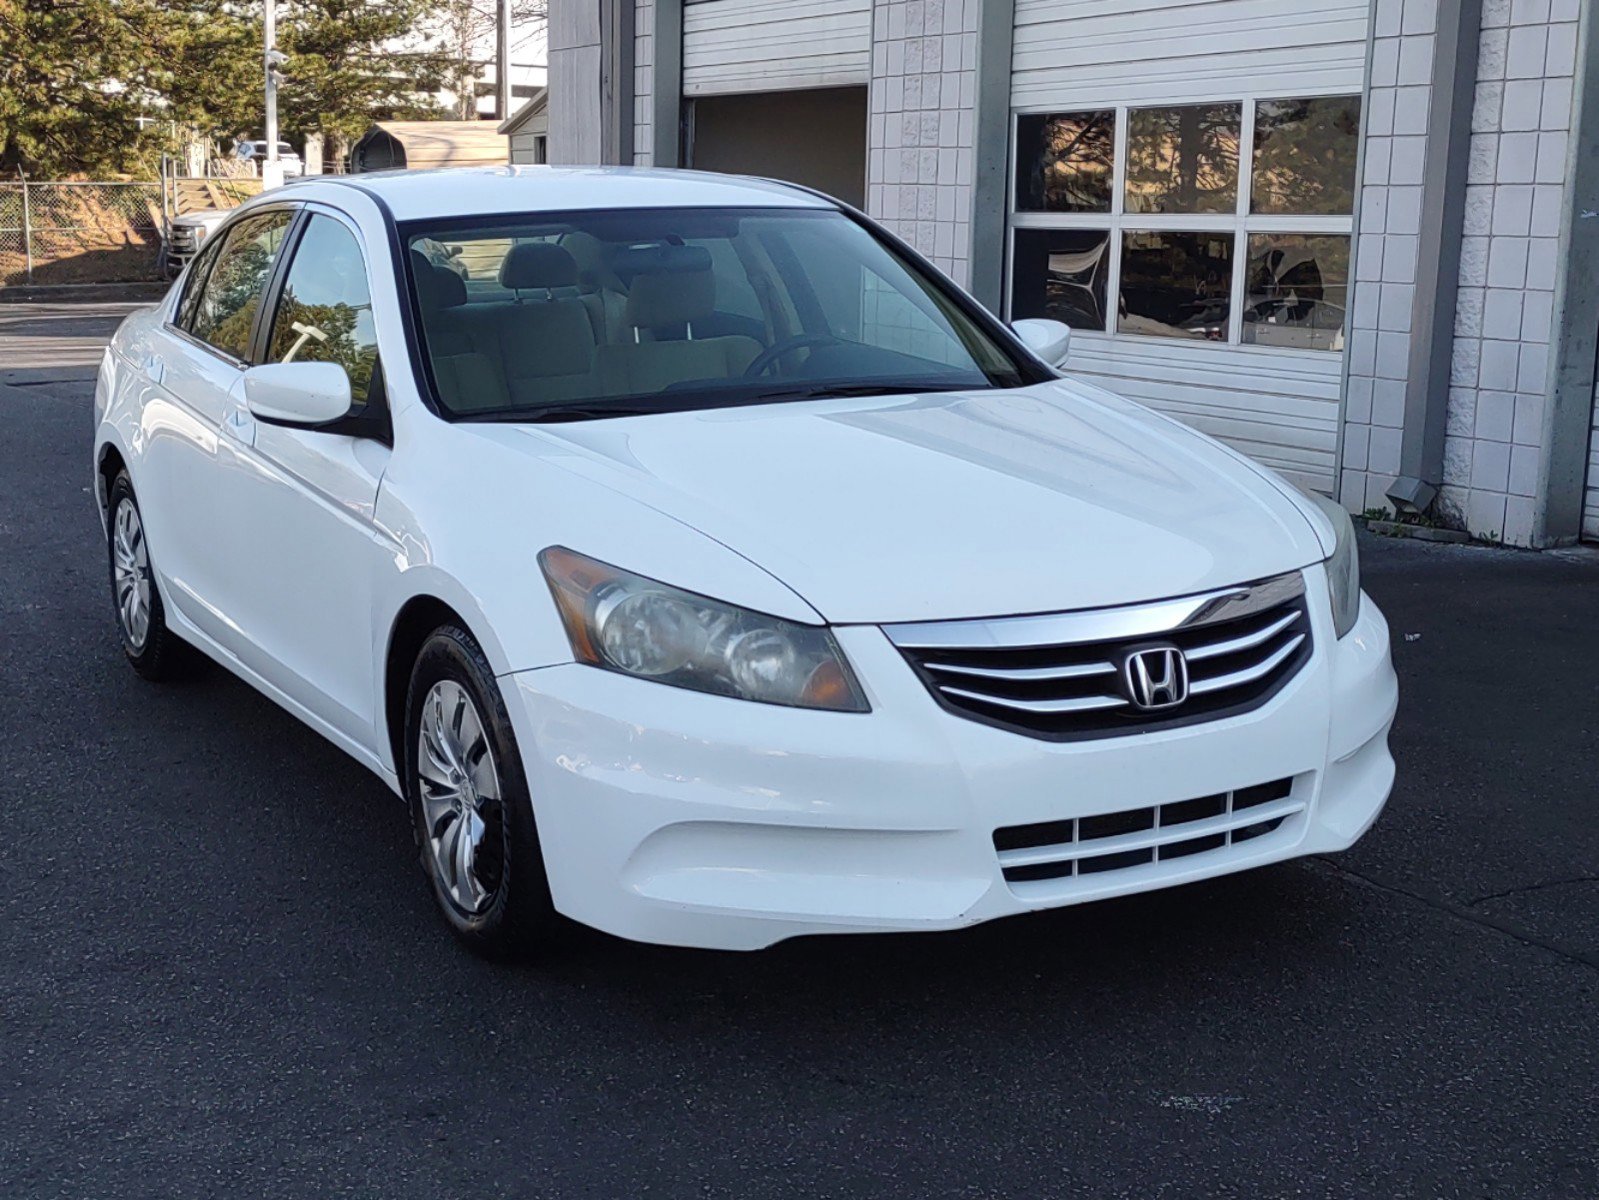 Used 2012 Honda Accord LX with VIN 1HGCP2F37CA133750 for sale in Brentwood, TN